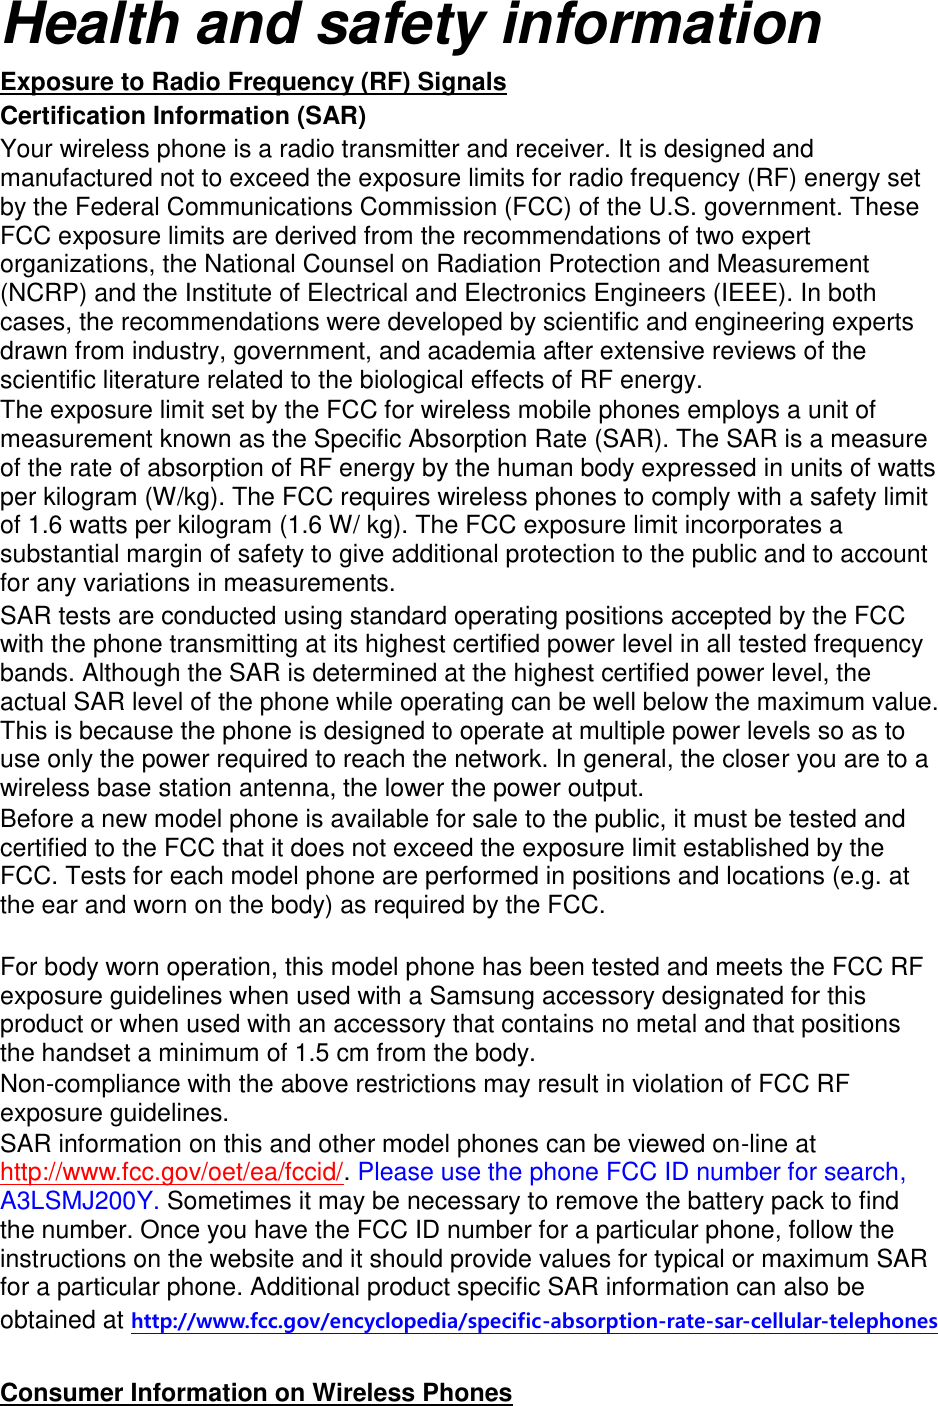 Health and safety information Exposure to Radio Frequency (RF) Signals Certification Information (SAR) Your wireless phone is a radio transmitter and receiver. It is designed and manufactured not to exceed the exposure limits for radio frequency (RF) energy set by the Federal Communications Commission (FCC) of the U.S. government. These FCC exposure limits are derived from the recommendations of two expert organizations, the National Counsel on Radiation Protection and Measurement (NCRP) and the Institute of Electrical and Electronics Engineers (IEEE). In both cases, the recommendations were developed by scientific and engineering experts drawn from industry, government, and academia after extensive reviews of the scientific literature related to the biological effects of RF energy. The exposure limit set by the FCC for wireless mobile phones employs a unit of measurement known as the Specific Absorption Rate (SAR). The SAR is a measure of the rate of absorption of RF energy by the human body expressed in units of watts per kilogram (W/kg). The FCC requires wireless phones to comply with a safety limit of 1.6 watts per kilogram (1.6 W/ kg). The FCC exposure limit incorporates a substantial margin of safety to give additional protection to the public and to account for any variations in measurements. SAR tests are conducted using standard operating positions accepted by the FCC with the phone transmitting at its highest certified power level in all tested frequency bands. Although the SAR is determined at the highest certified power level, the actual SAR level of the phone while operating can be well below the maximum value. This is because the phone is designed to operate at multiple power levels so as to use only the power required to reach the network. In general, the closer you are to a wireless base station antenna, the lower the power output. Before a new model phone is available for sale to the public, it must be tested and certified to the FCC that it does not exceed the exposure limit established by the FCC. Tests for each model phone are performed in positions and locations (e.g. at the ear and worn on the body) as required by the FCC.      For body worn operation, this model phone has been tested and meets the FCC RF exposure guidelines when used with a Samsung accessory designated for this product or when used with an accessory that contains no metal and that positions the handset a minimum of 1.5 cm from the body.   Non-compliance with the above restrictions may result in violation of FCC RF exposure guidelines. SAR information on this and other model phones can be viewed on-line at http://www.fcc.gov/oet/ea/fccid/. Please use the phone FCC ID number for search, A3LSMJ200Y. Sometimes it may be necessary to remove the battery pack to find the number. Once you have the FCC ID number for a particular phone, follow the instructions on the website and it should provide values for typical or maximum SAR for a particular phone. Additional product specific SAR information can also be obtained at http://www.fcc.gov/encyclopedia/specific-absorption-rate-sar-cellular-telephones  Consumer Information on Wireless Phones 